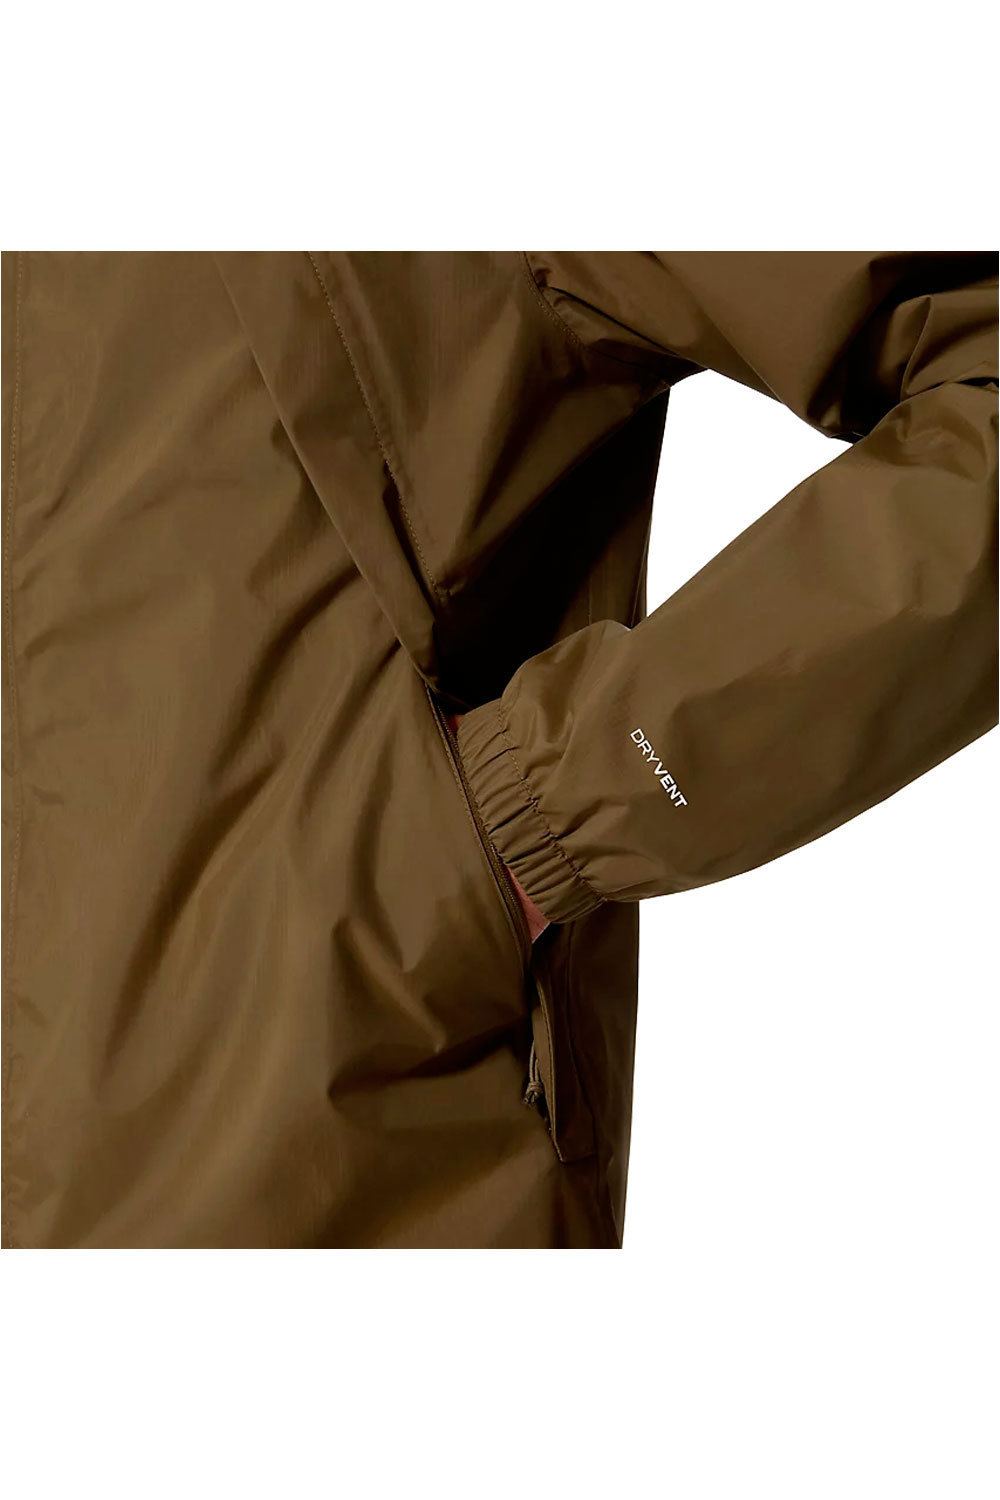 The North Face chaqueta impermeable hombre M ANTORA JACKET 05